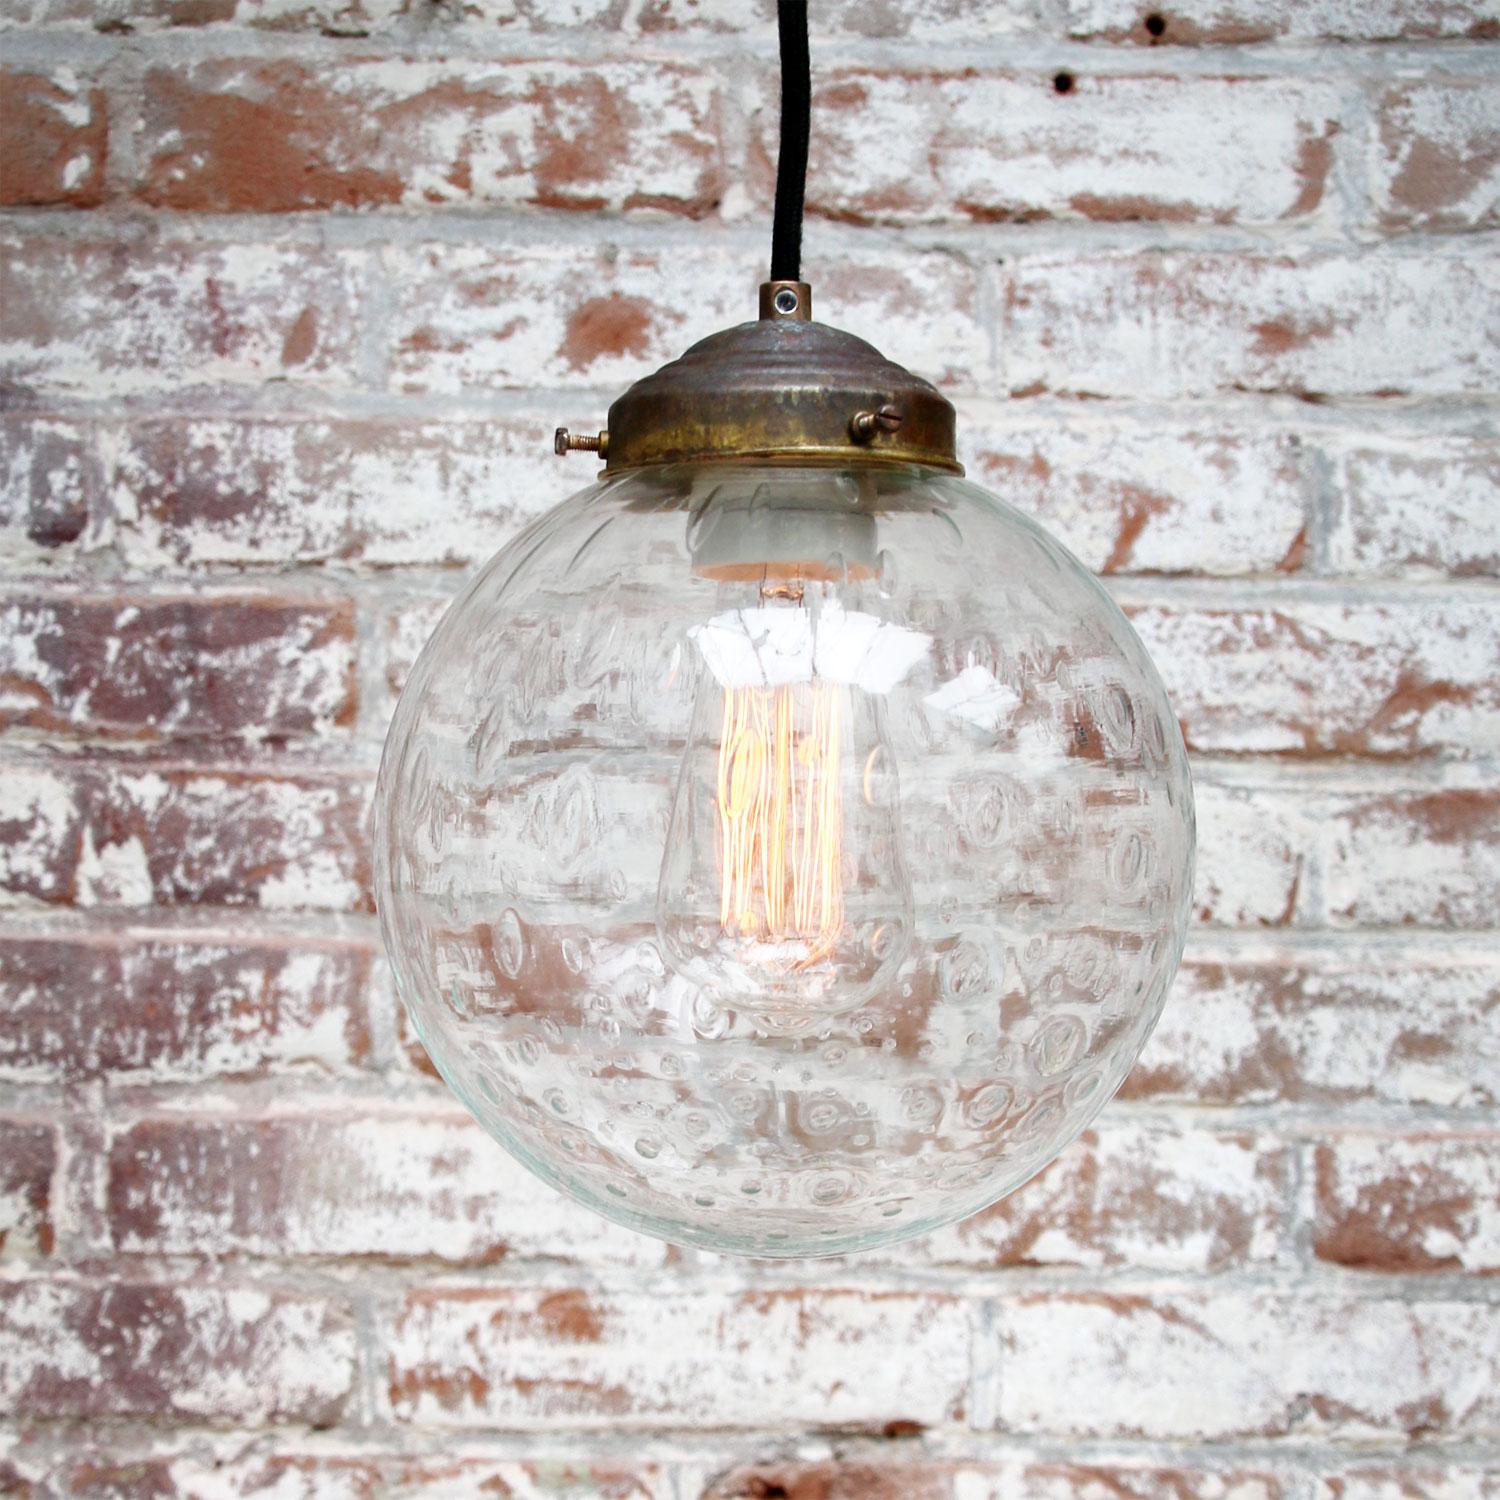 Original vintage air bubble glass pendant.
2 meter black wire
Brass top

Weight: 2.00 kg / 4.4 lb

Priced per individual item. All lamps have been made suitable by international standards for incandescent light bulbs, energy-efficient and LED